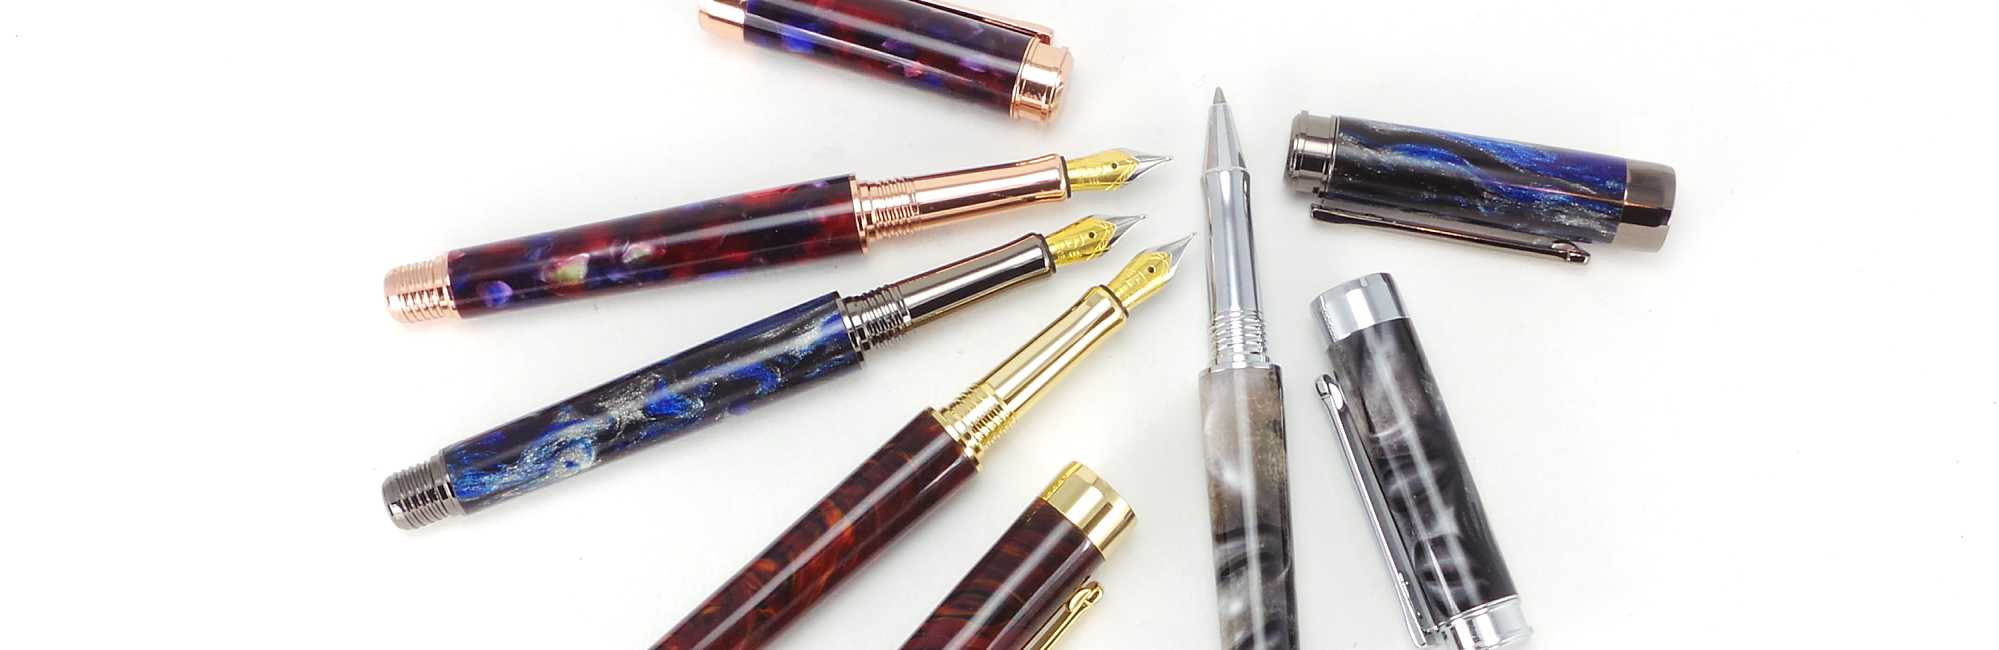 Leveche fountain pen kits and rollerball pen kits